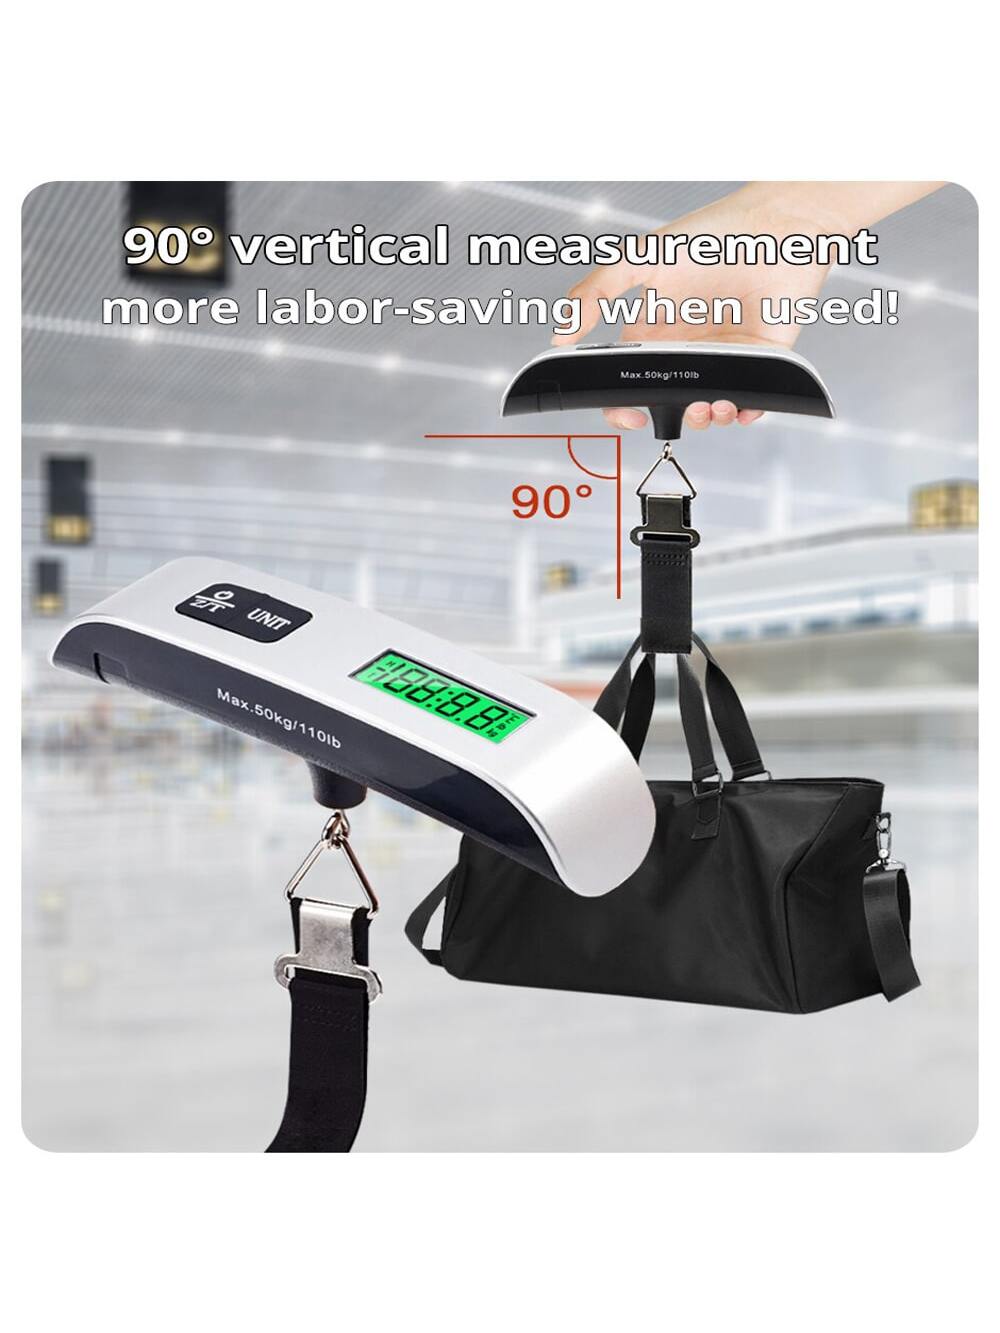 1pcs Portable Scale Digital LCD Display 110lb/50kg Electronic Luggage Hanging Suitcase Travel Weighs Baggage Bag Weight Balance-Silver-10